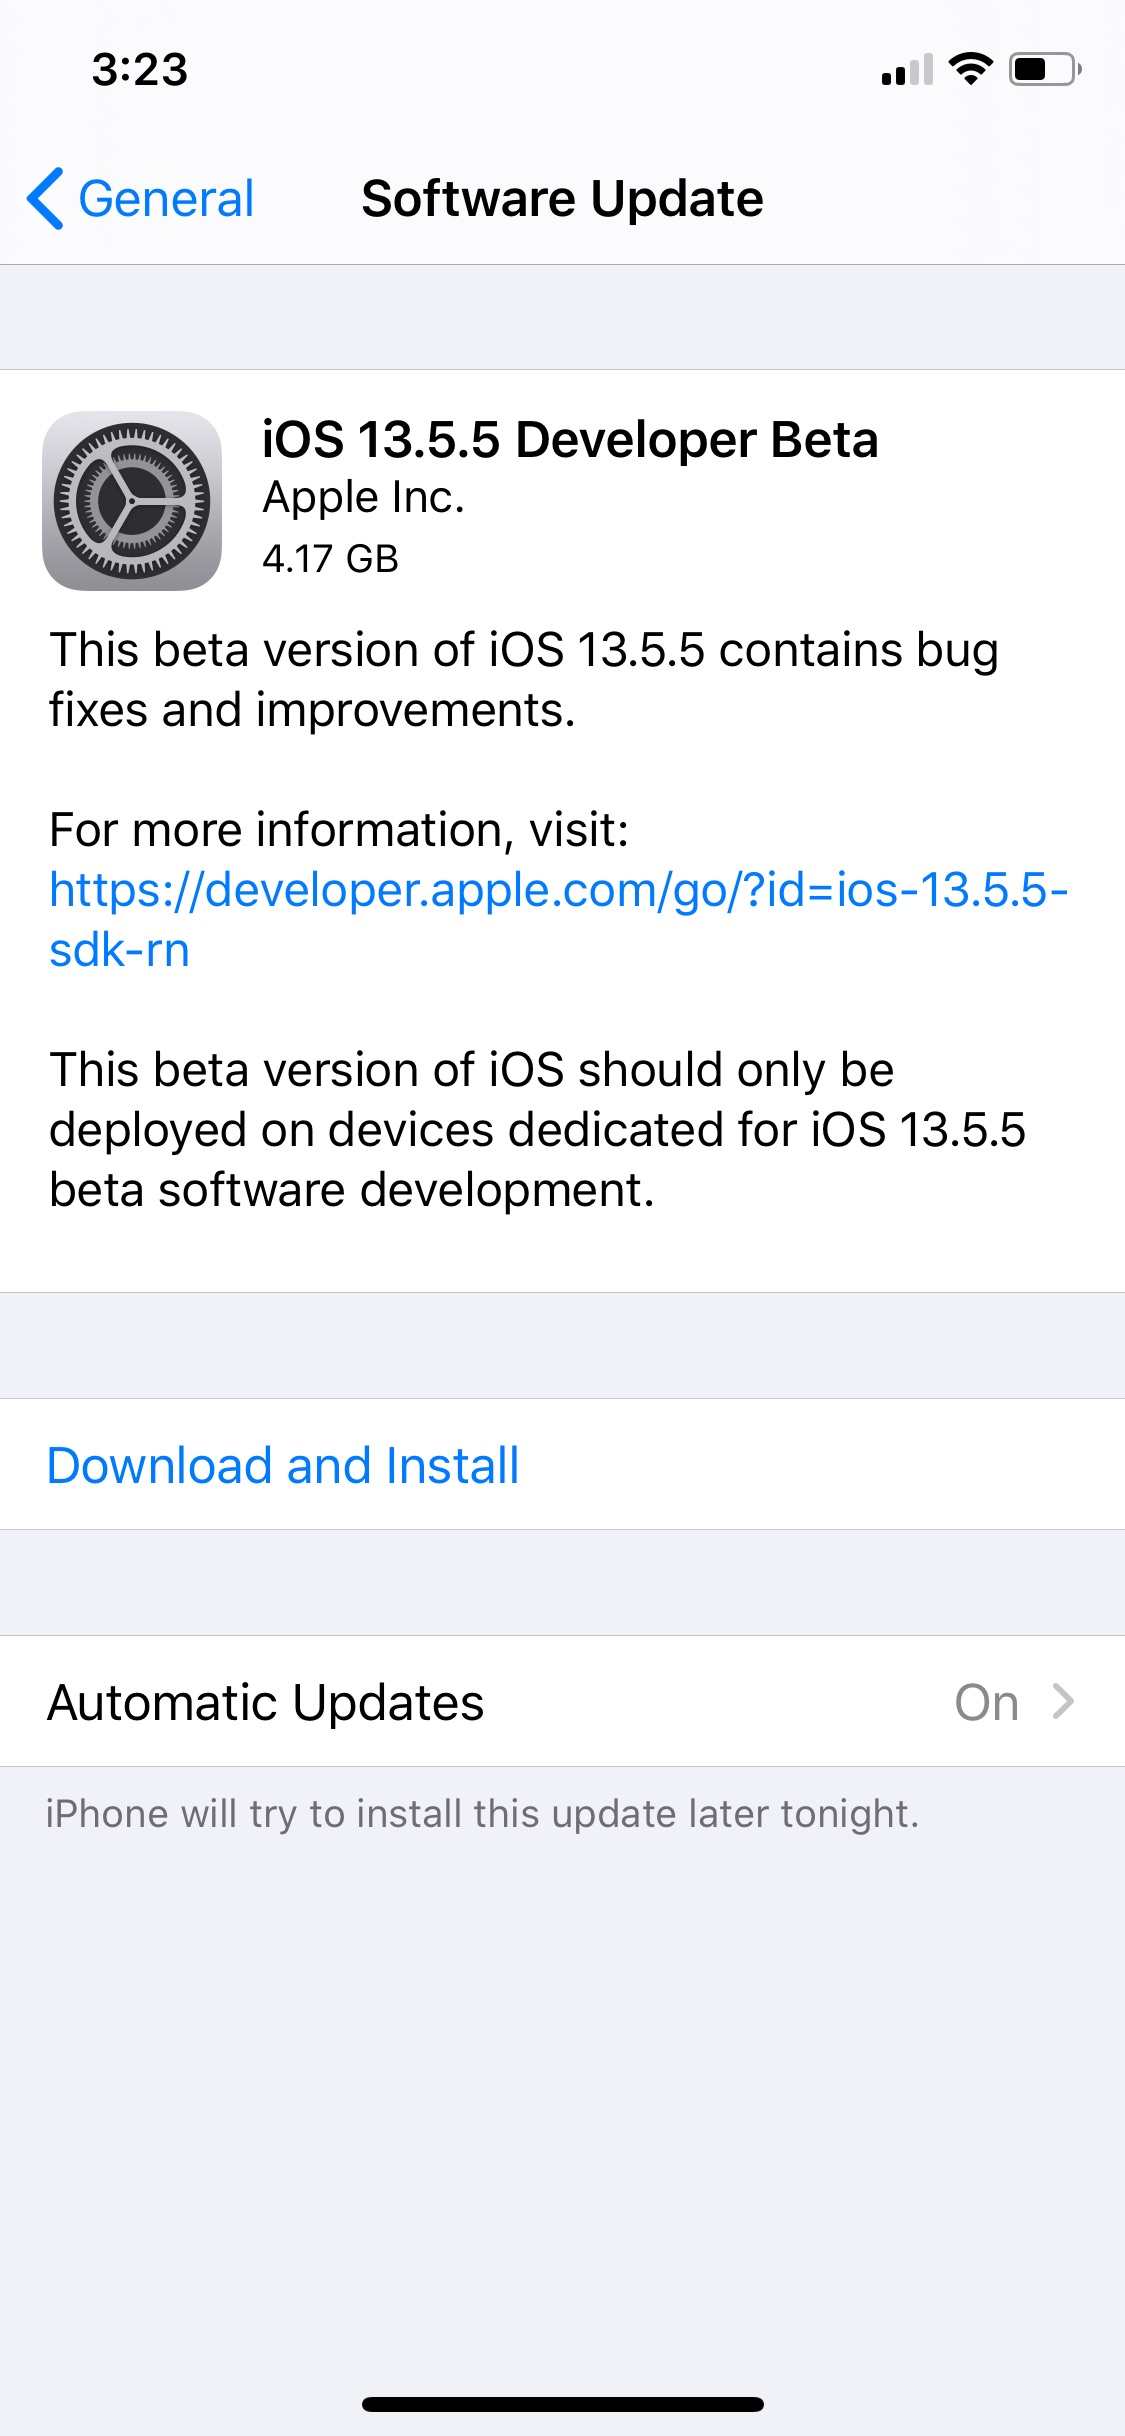 Apple Releases iOS 13.5.5 Beta and iPadOS 13.5.5 Beta to Developers [Download]